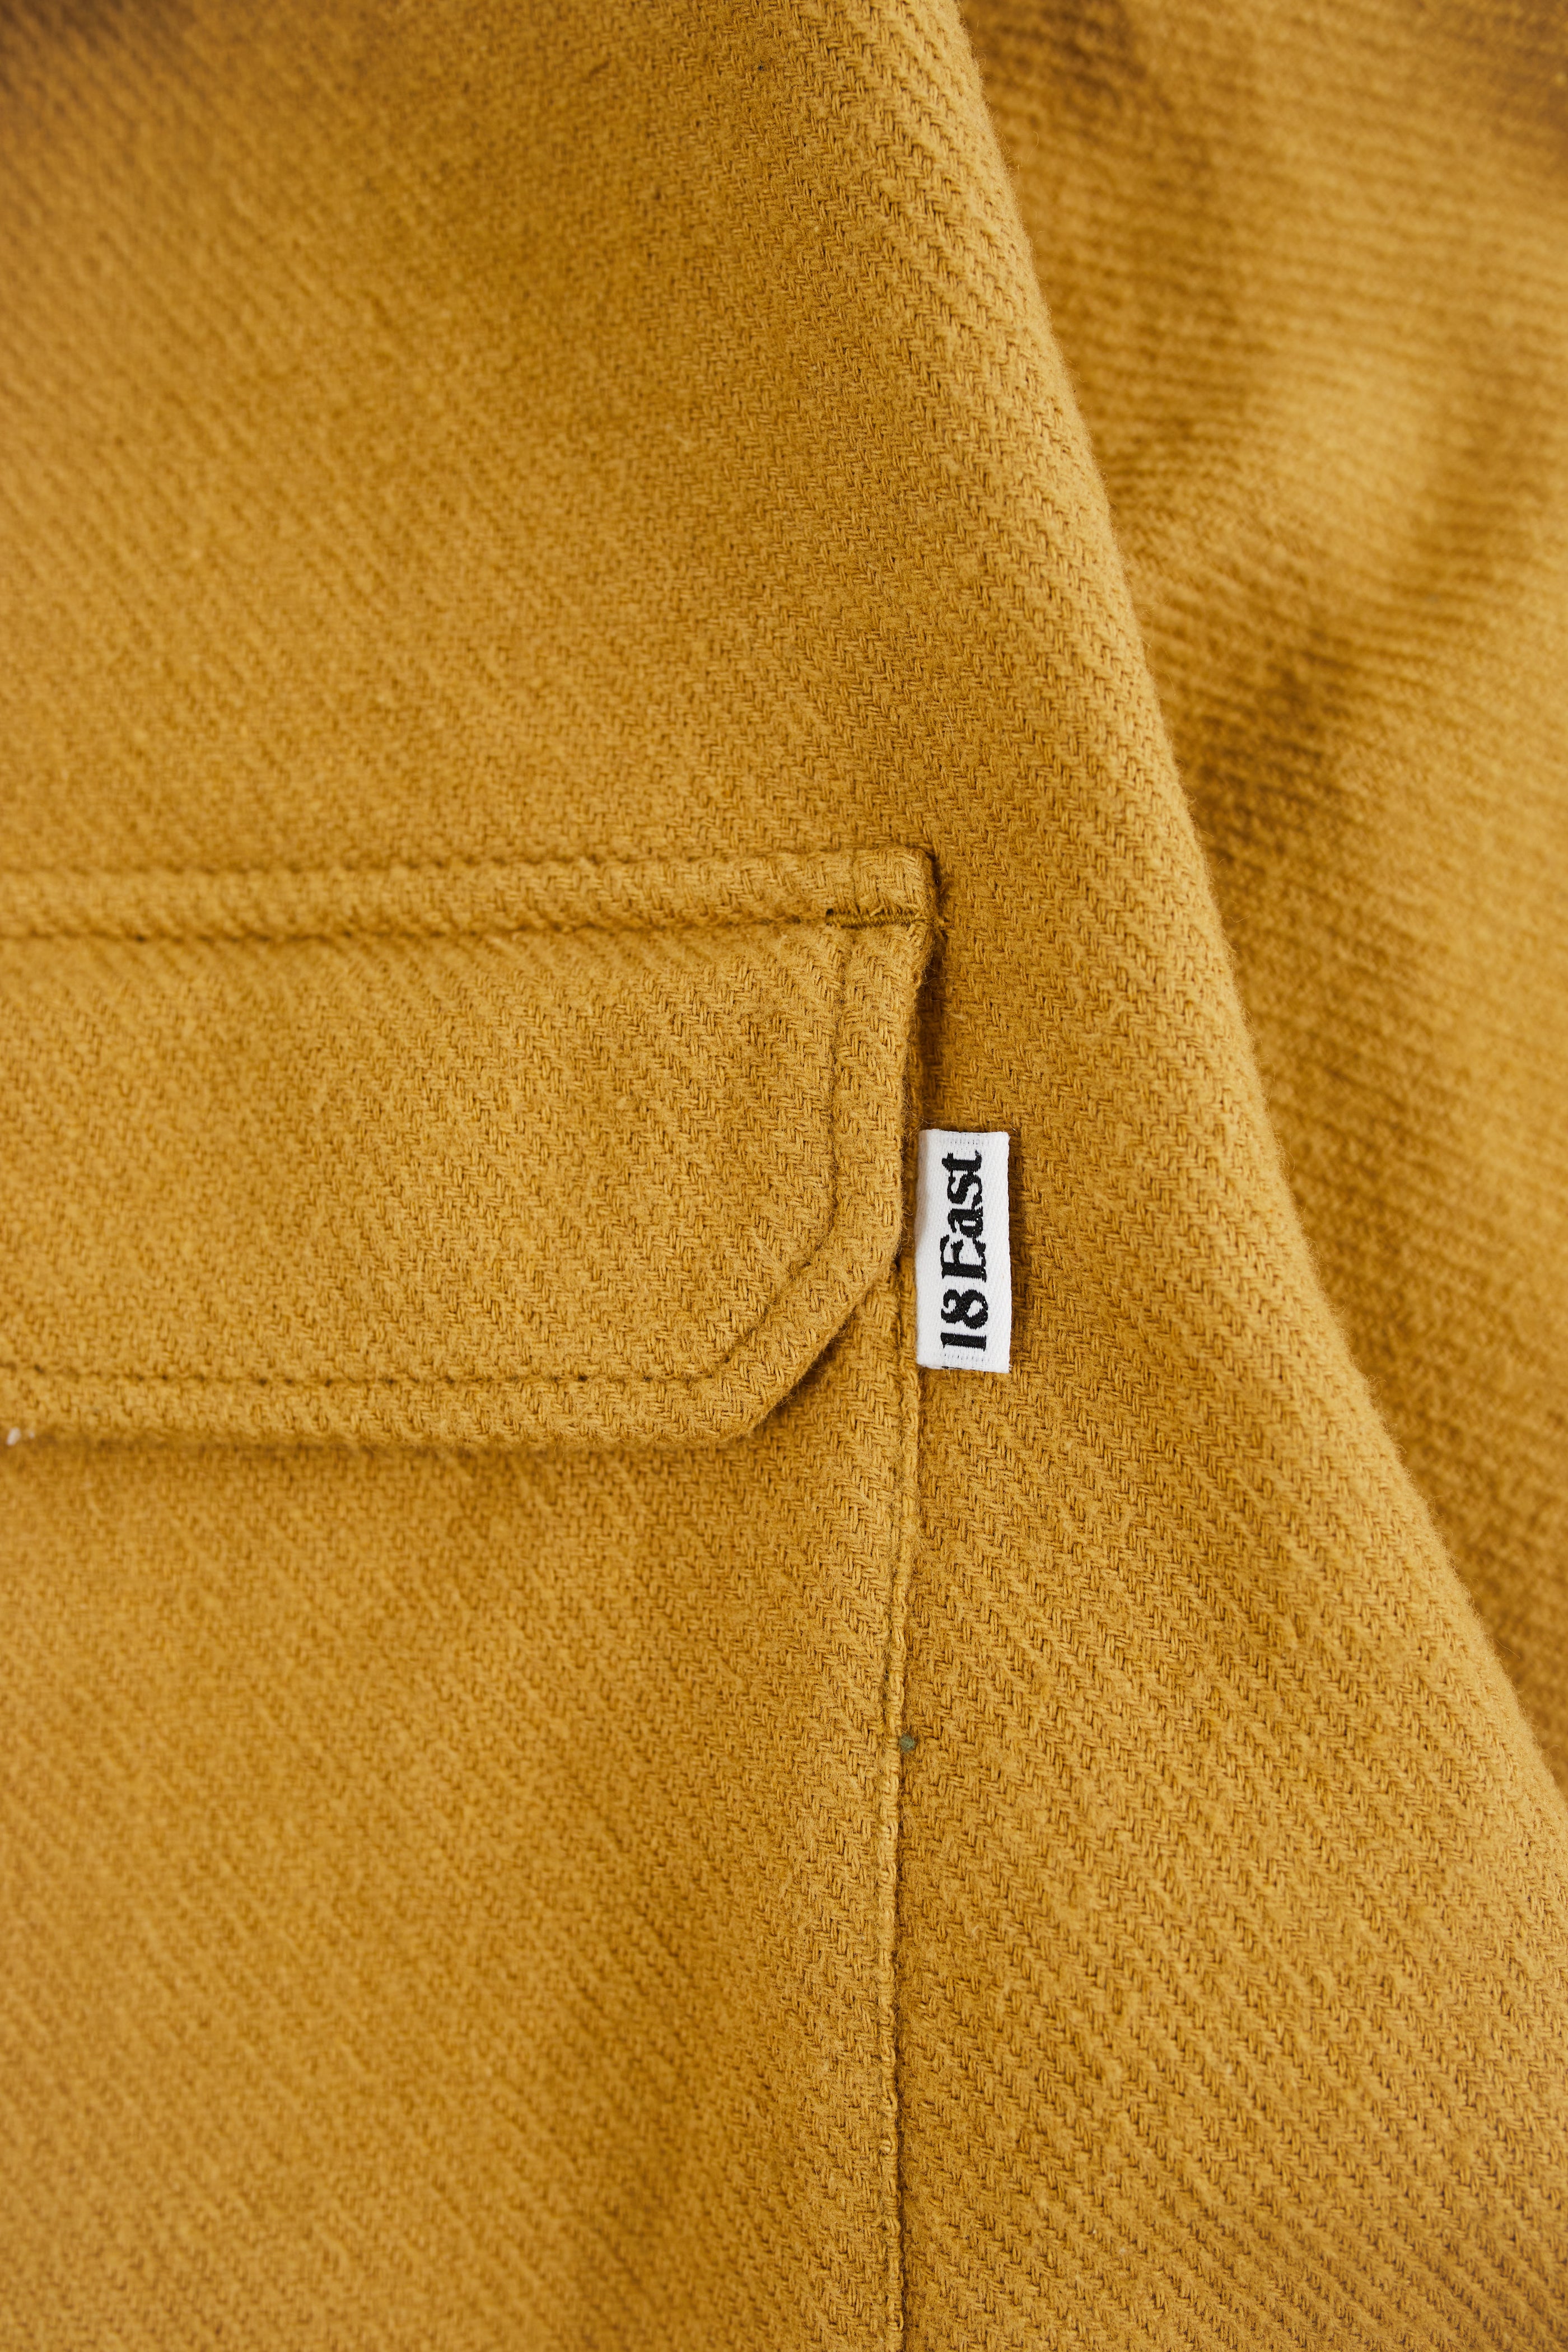 FIELD SHIRT - FENNEL SEED BRUSHED COTTON TWILL